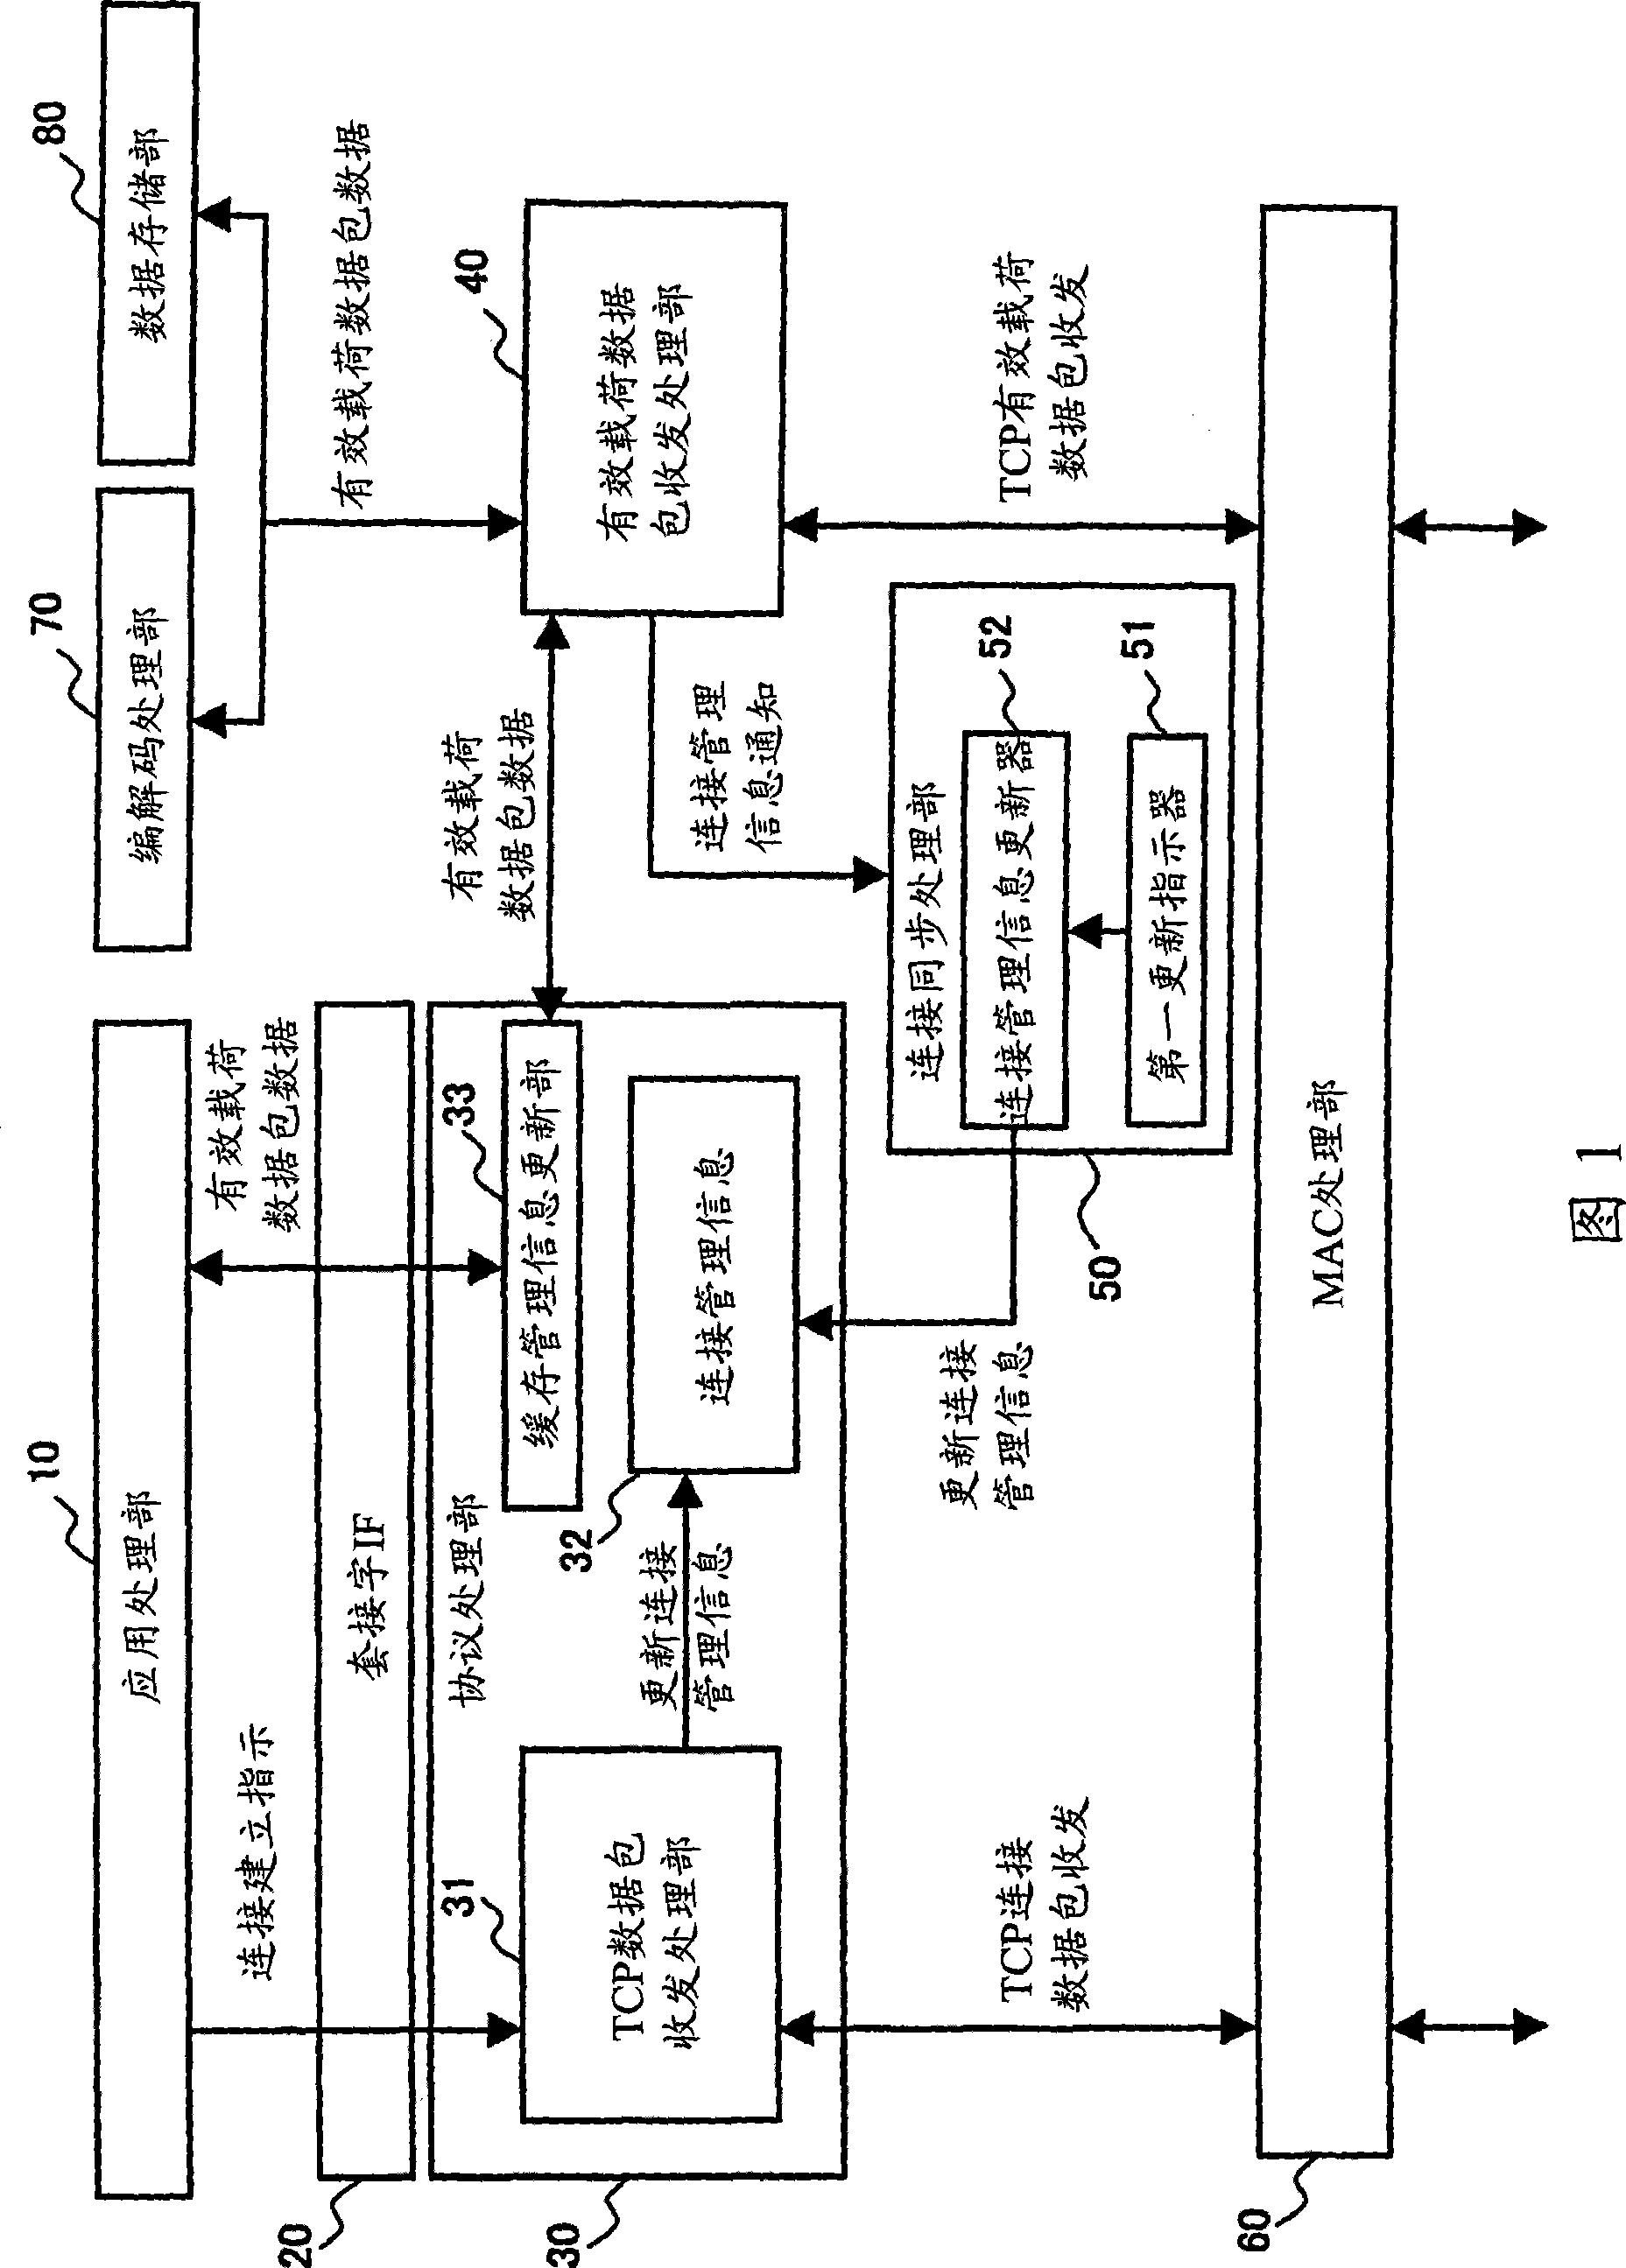 TCP packet communication device and techniques related thereto